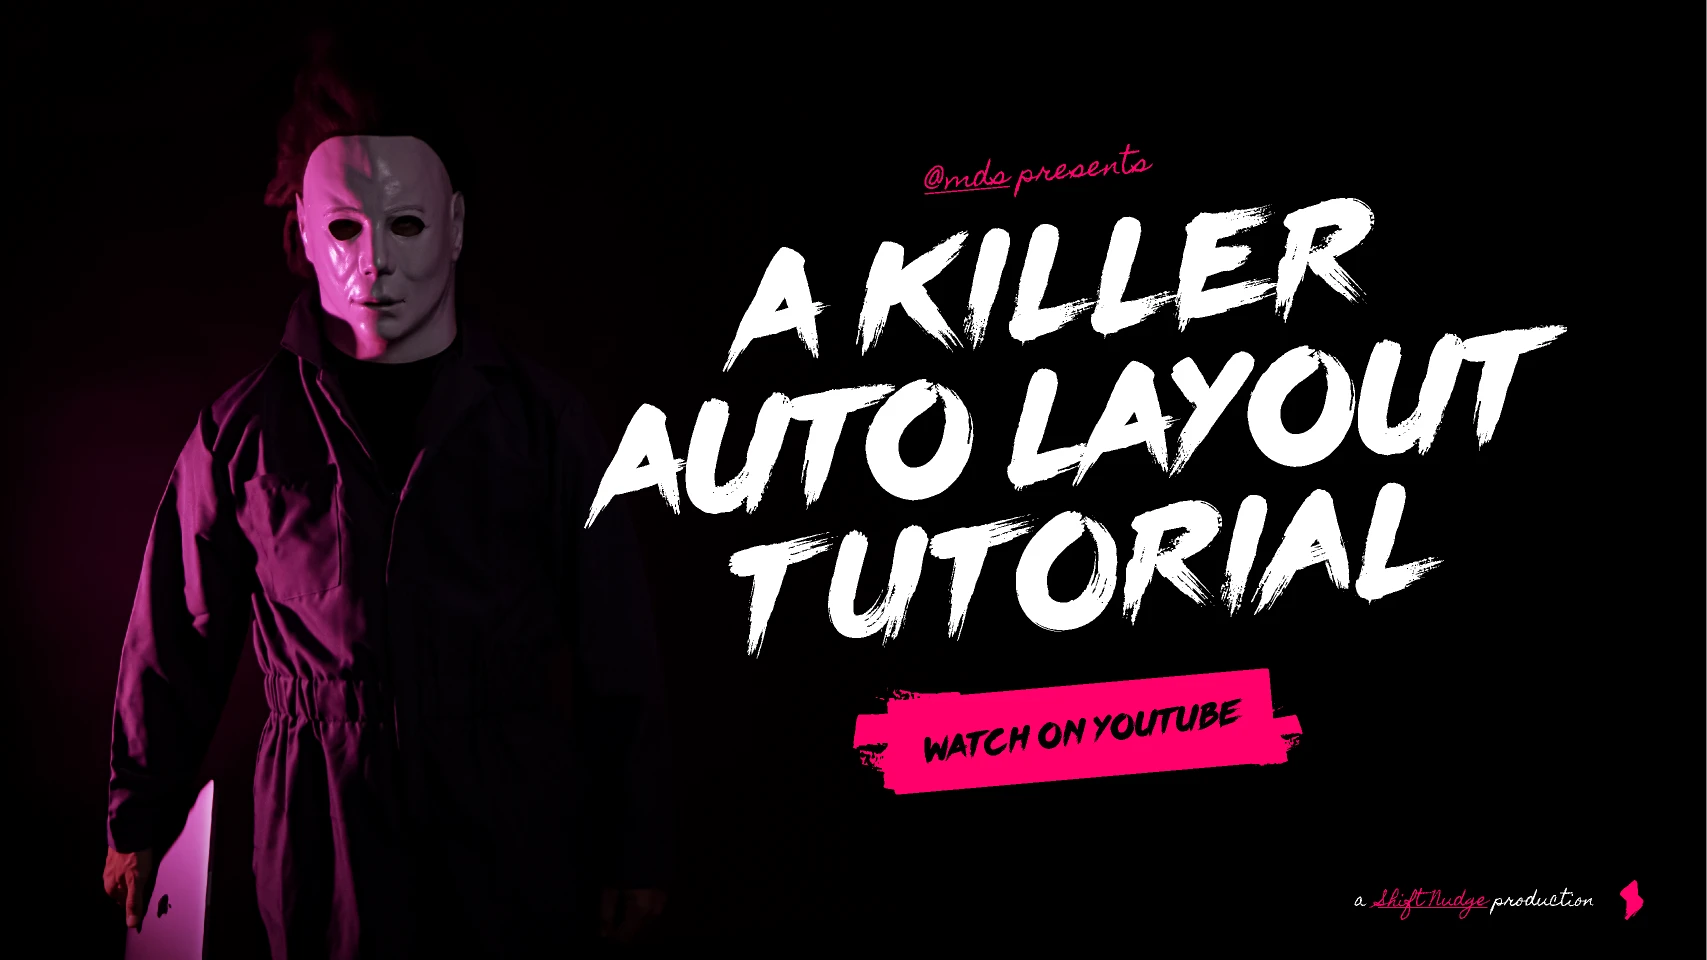 Killer Auto Layout Tutorial for Figma and Adobe XD